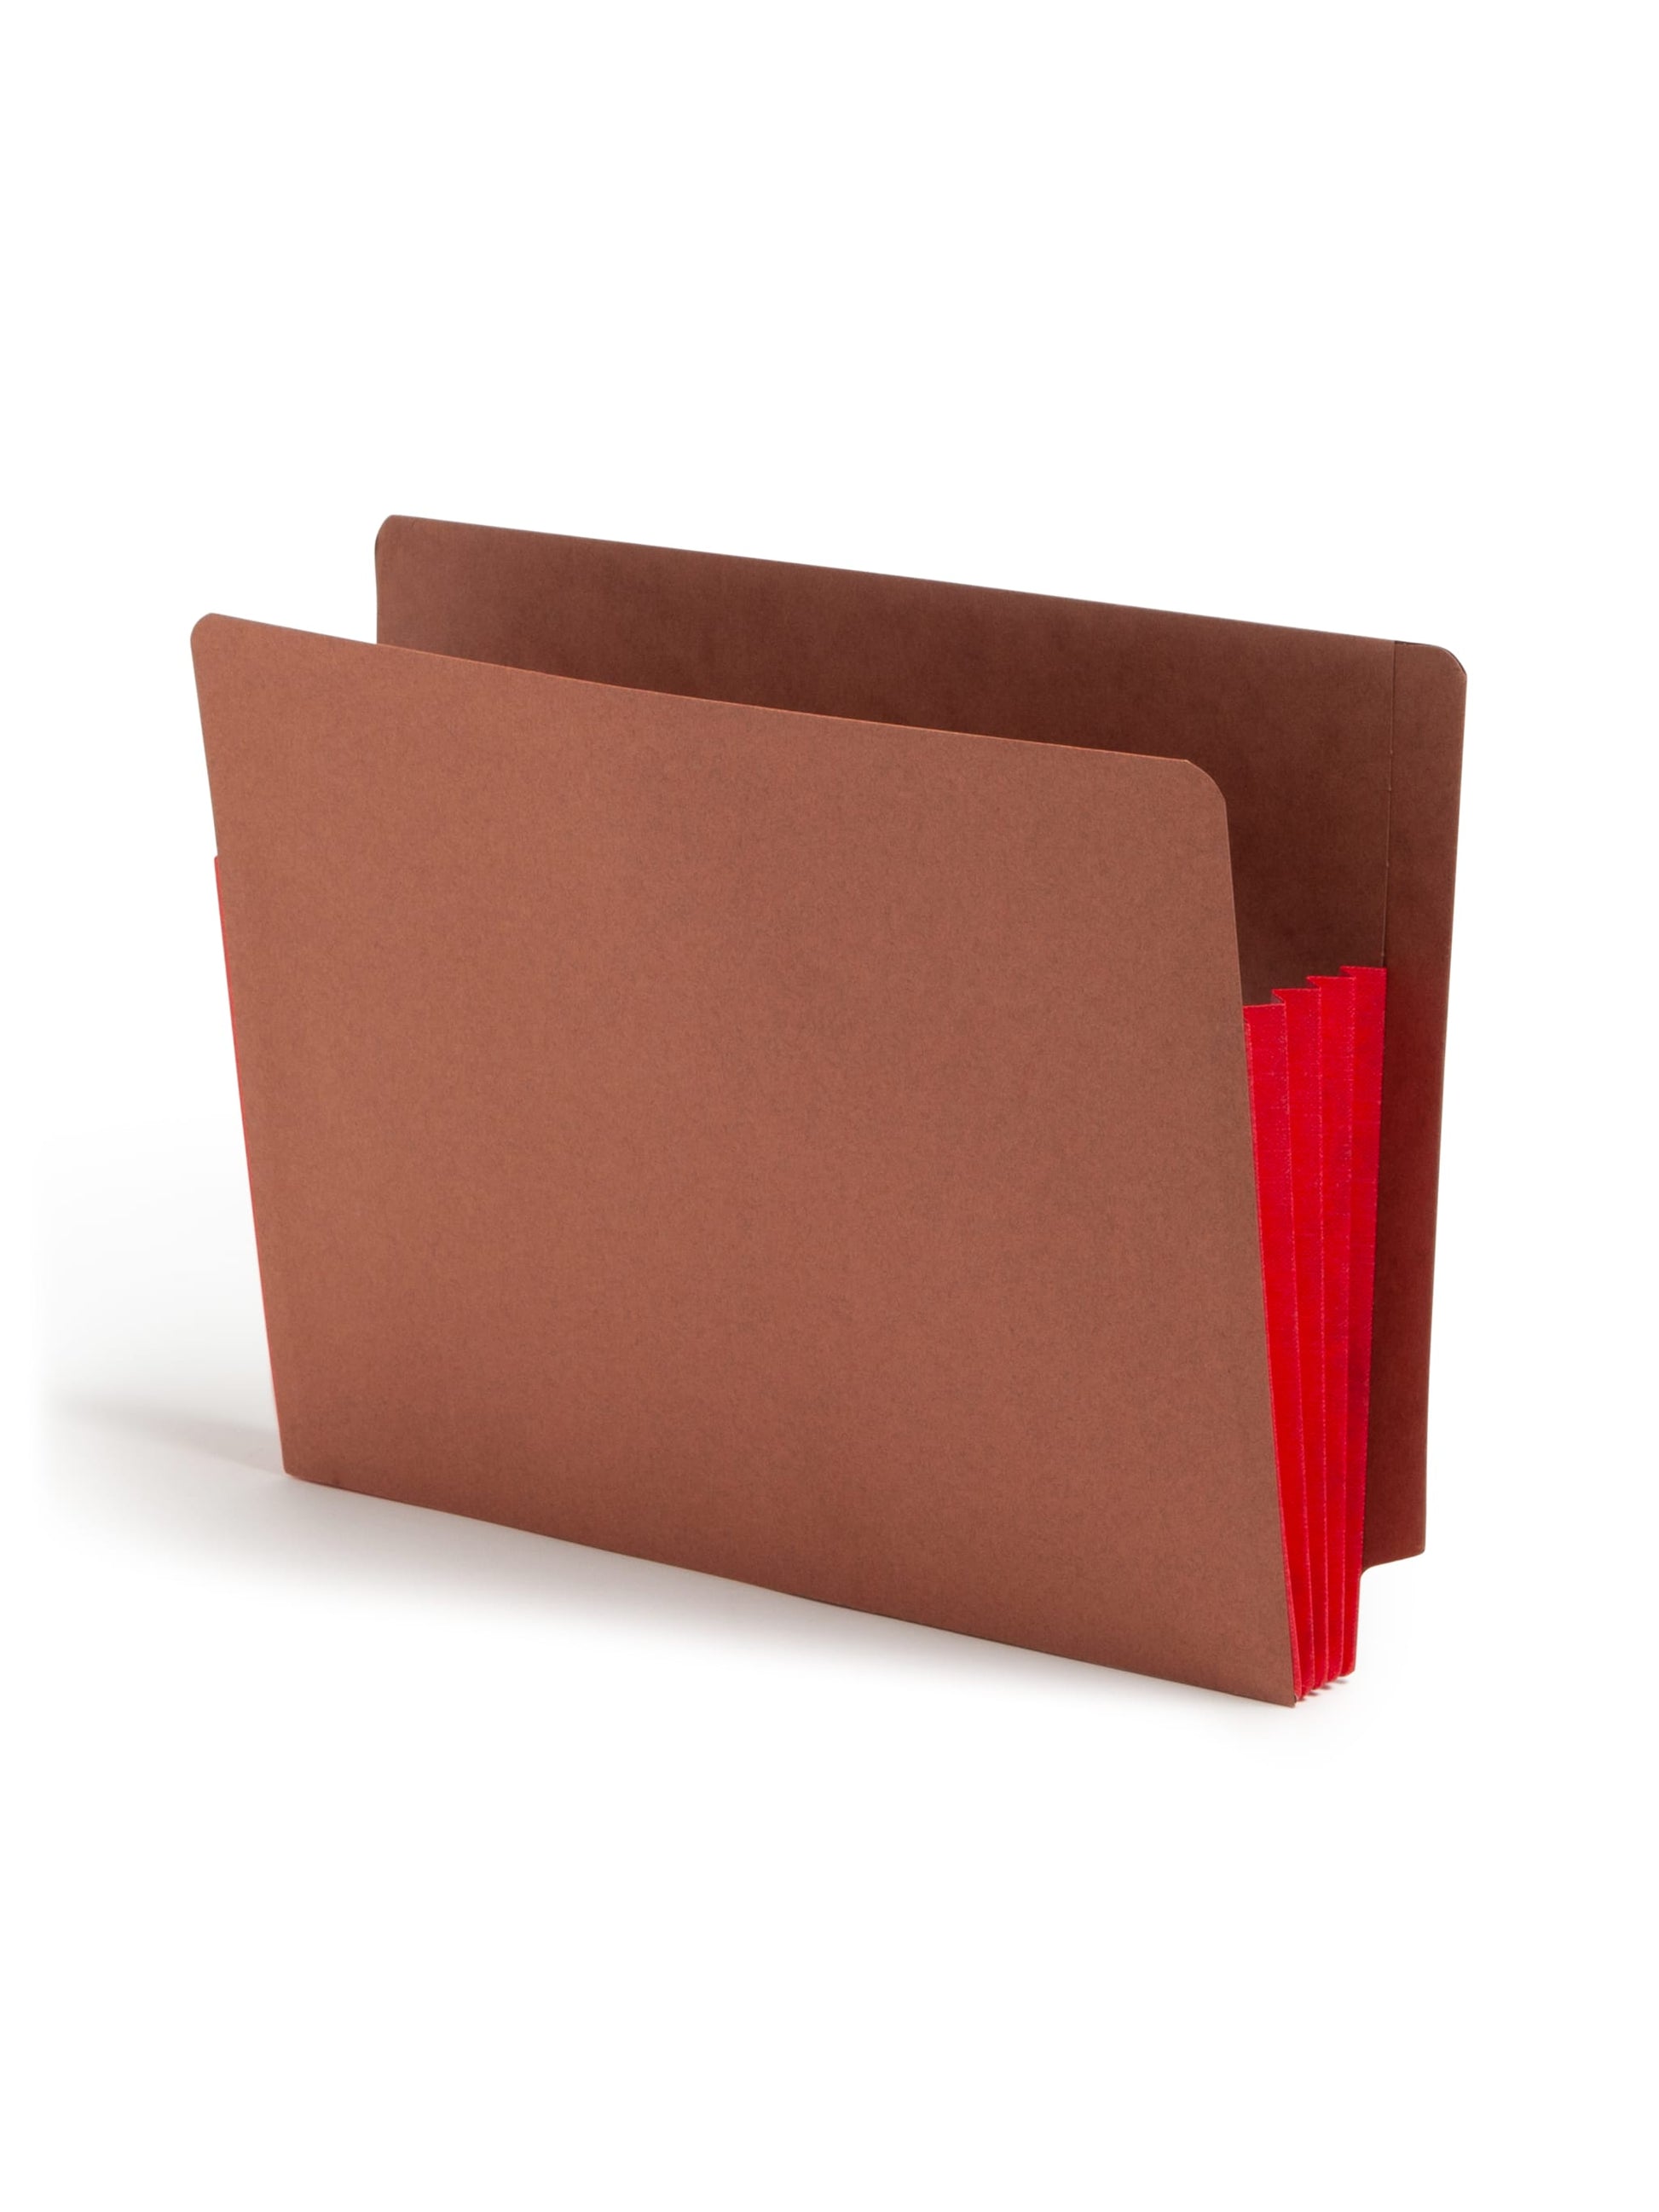 Reinforced End Tab File Pockets, Straight-Cut Tab, 3-1/2 inch Expansion, Red Color, Extra Wide Letter Size, Set of 0, 30086486736863